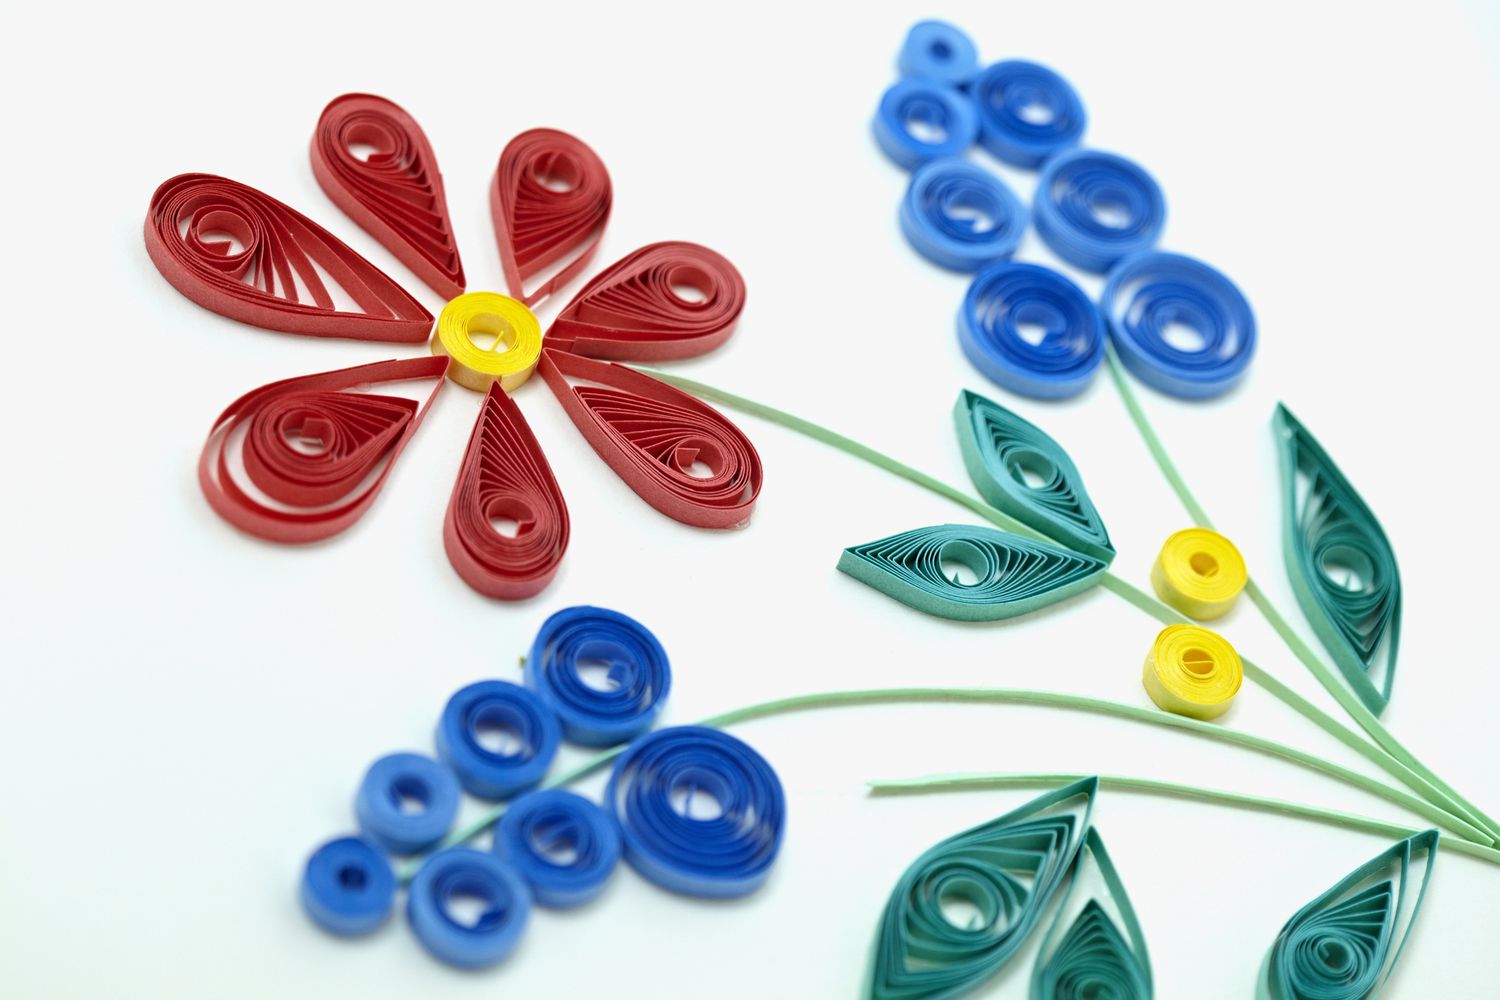 Paper quilling is the art of cutting paper into long thin strips, rolling and pinching the pieces into different shapes, and then gluing the shapes together to form decorative art. 